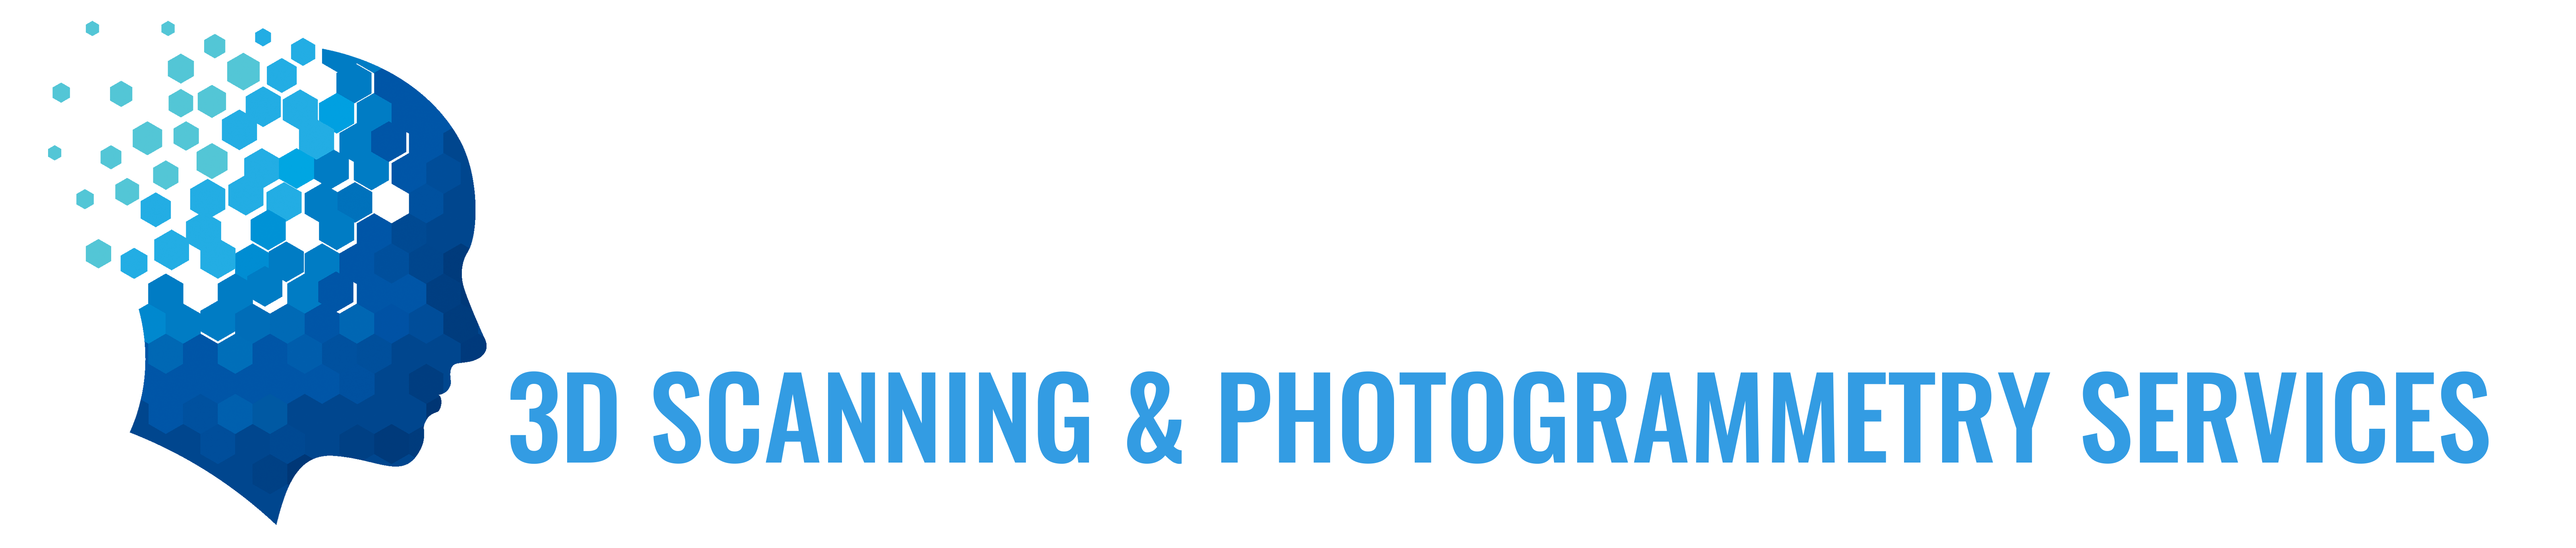 3D Scanning Los Angeles | Photogrammetry Services Los Angeles